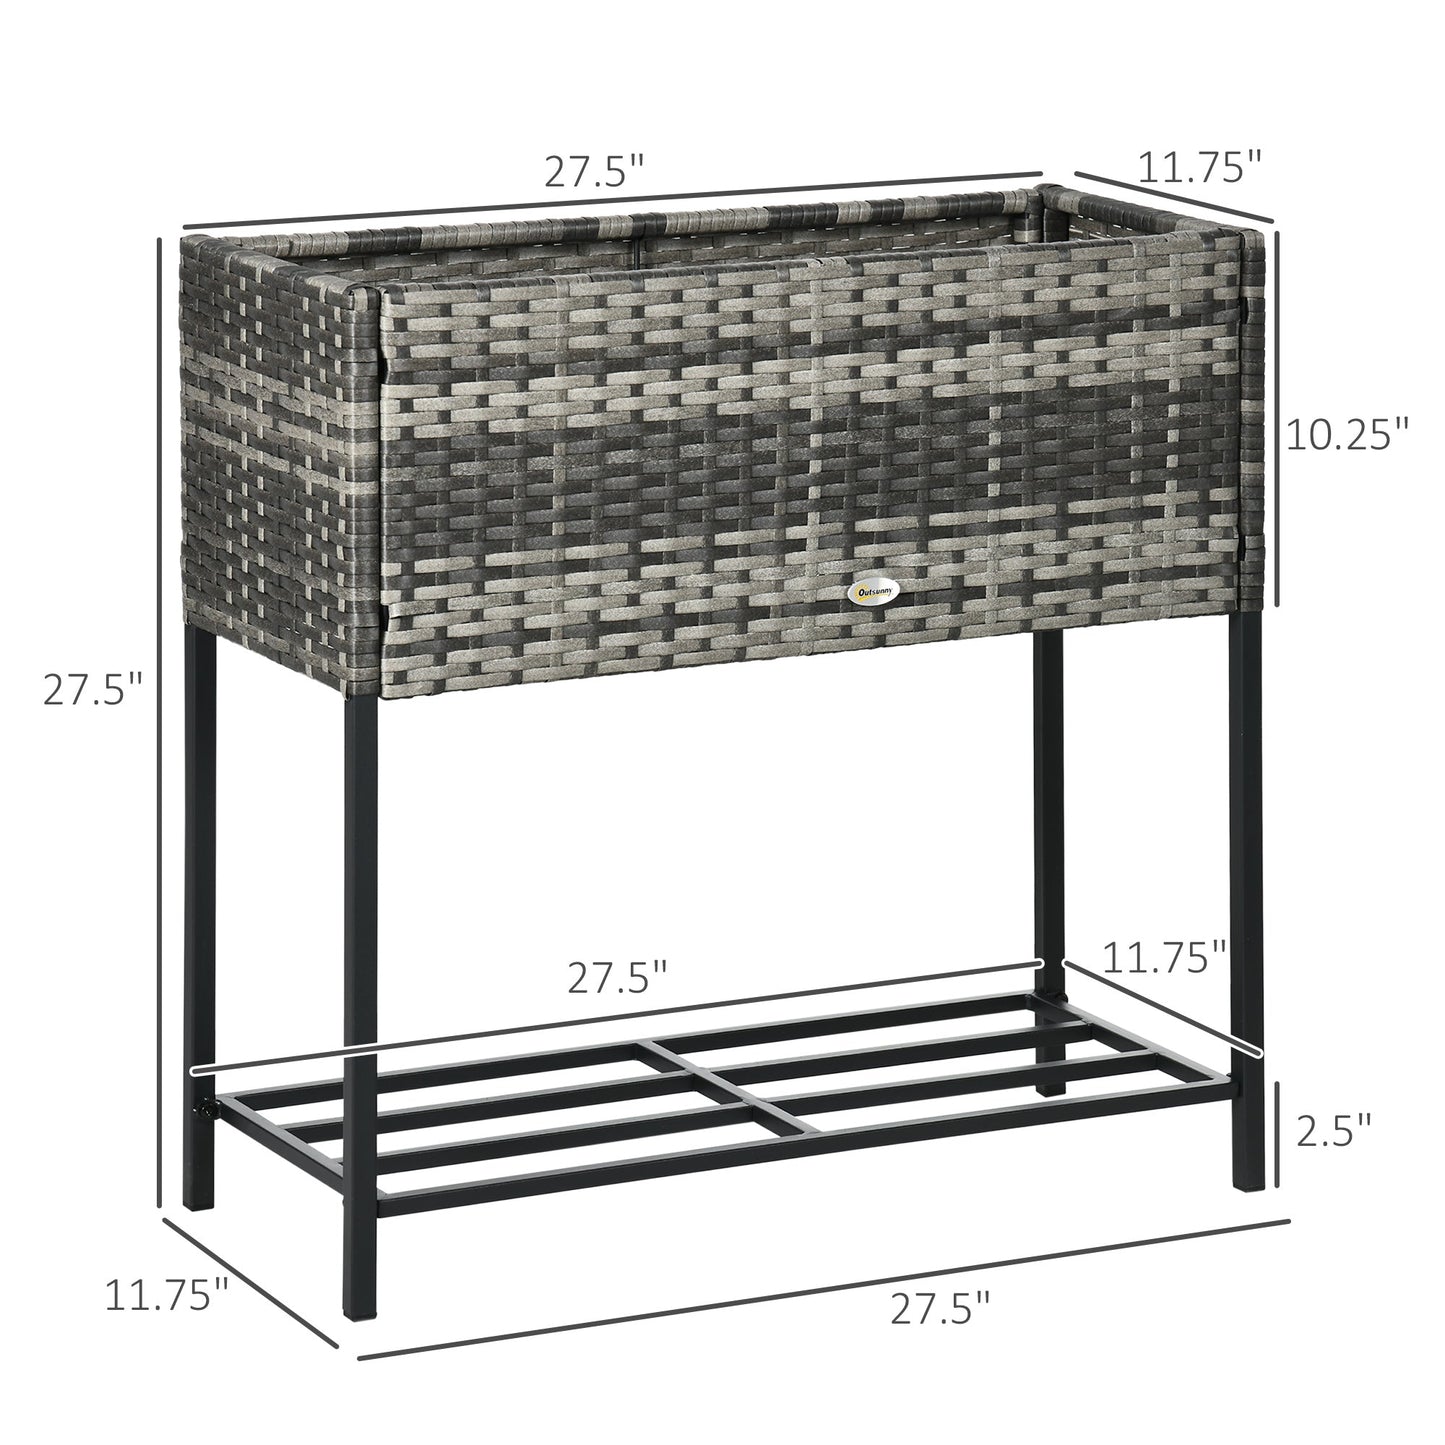 Outdoor and Garden-Raised Garden Bed, Steel Planter Box with legs, Rattan Wicker Look, Tool Storage Shelf, Portable Design for Herbs, Vegetables, Flowers, Gray - Outdoor Style Company